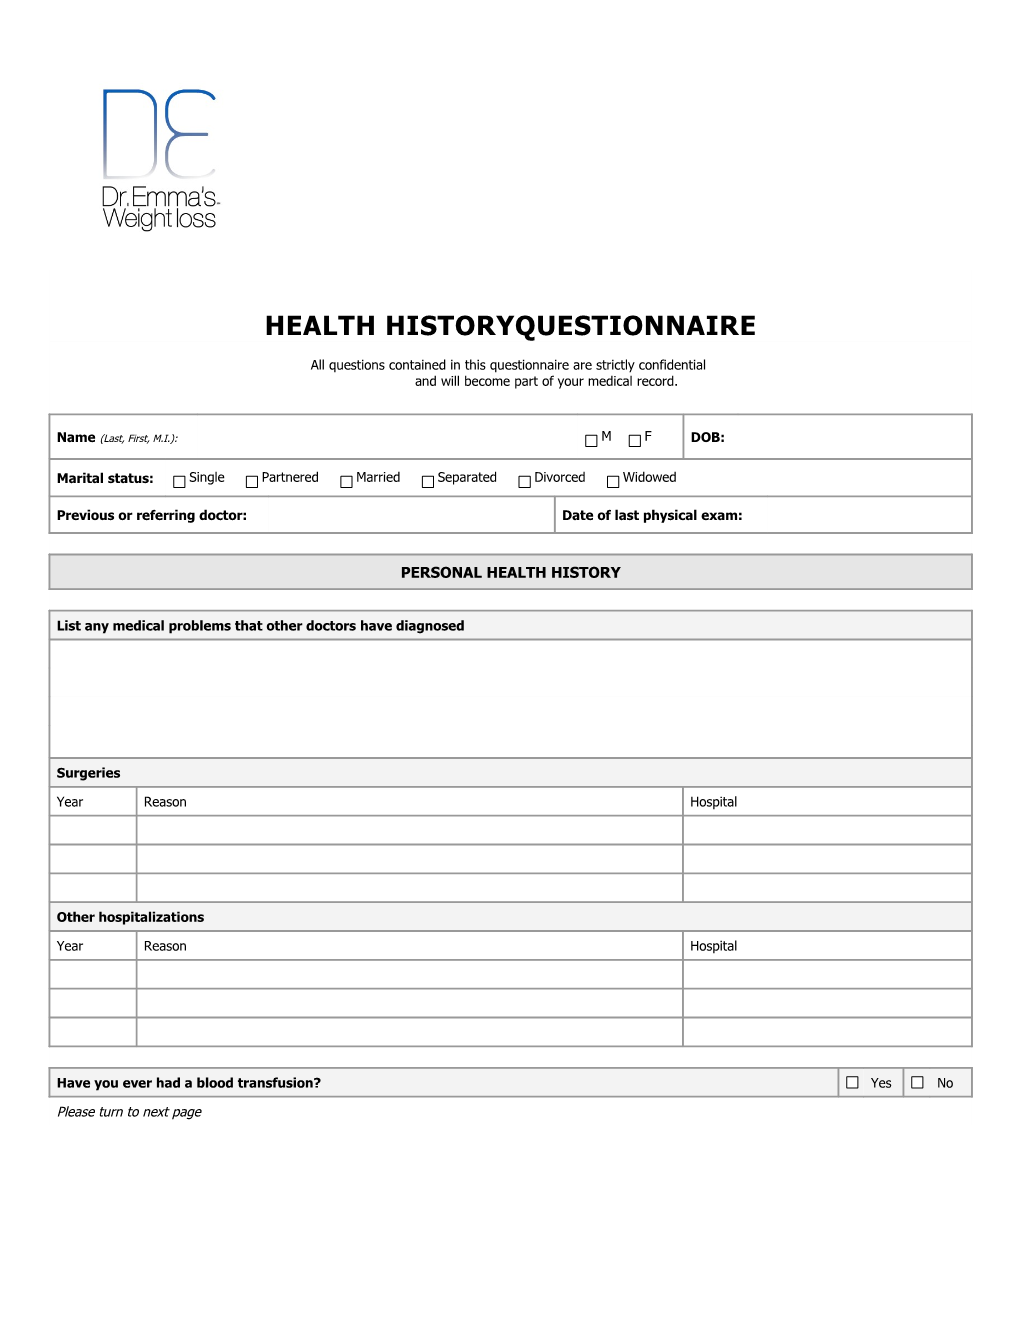 Health History Questionnaire (Online)